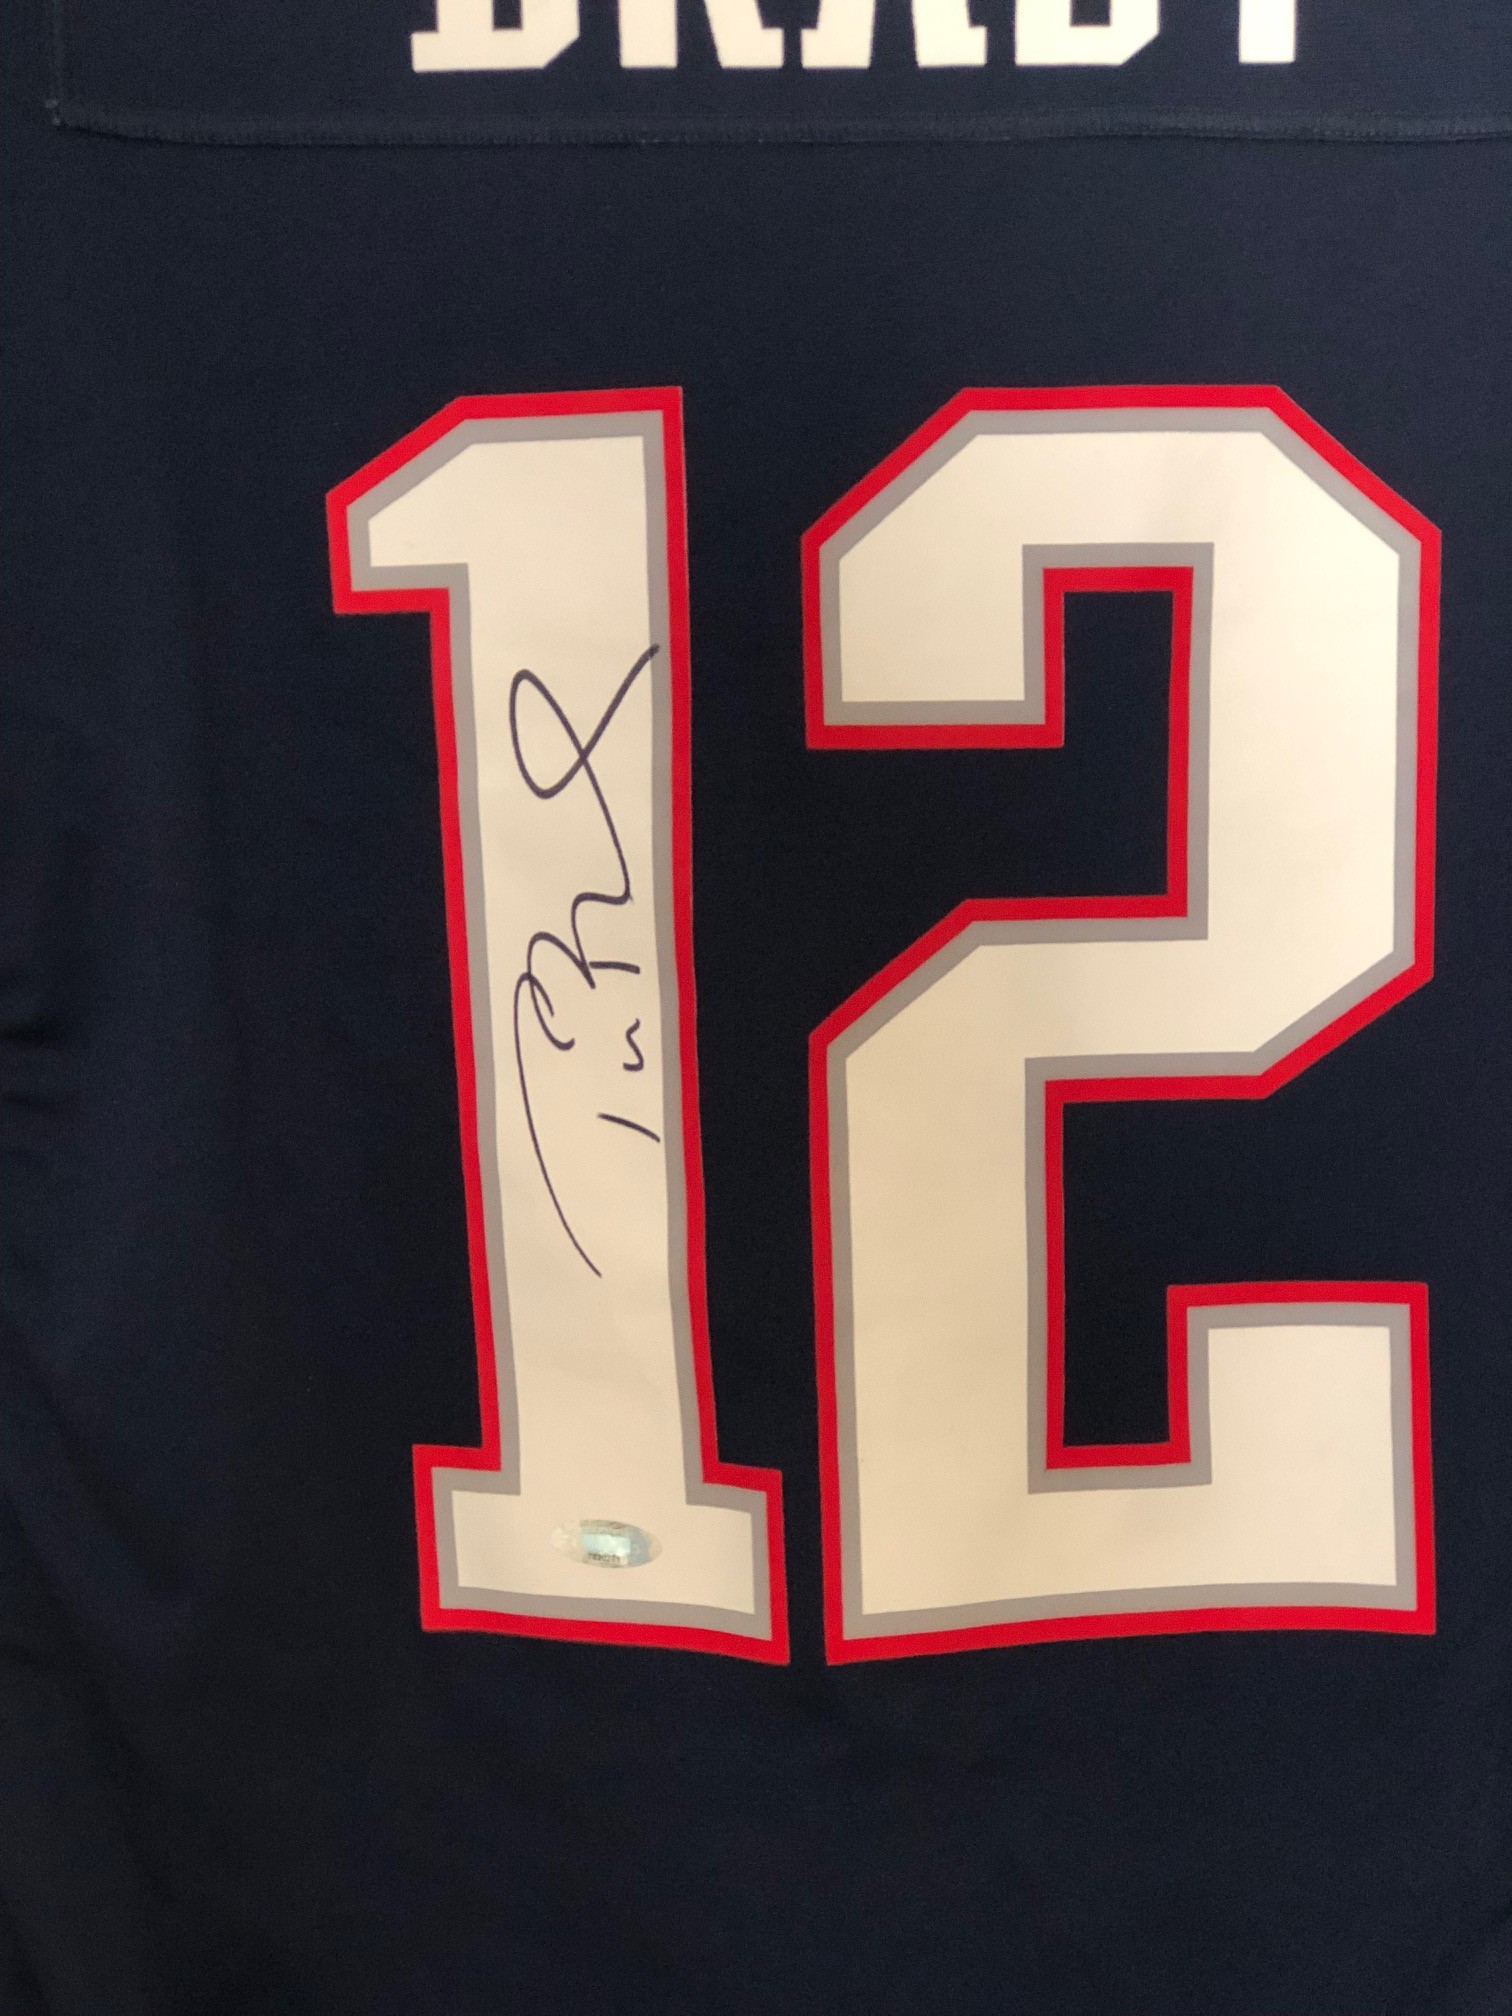 Patriots To Host Jersey Auction To Benefit Operation Shoebox NJ